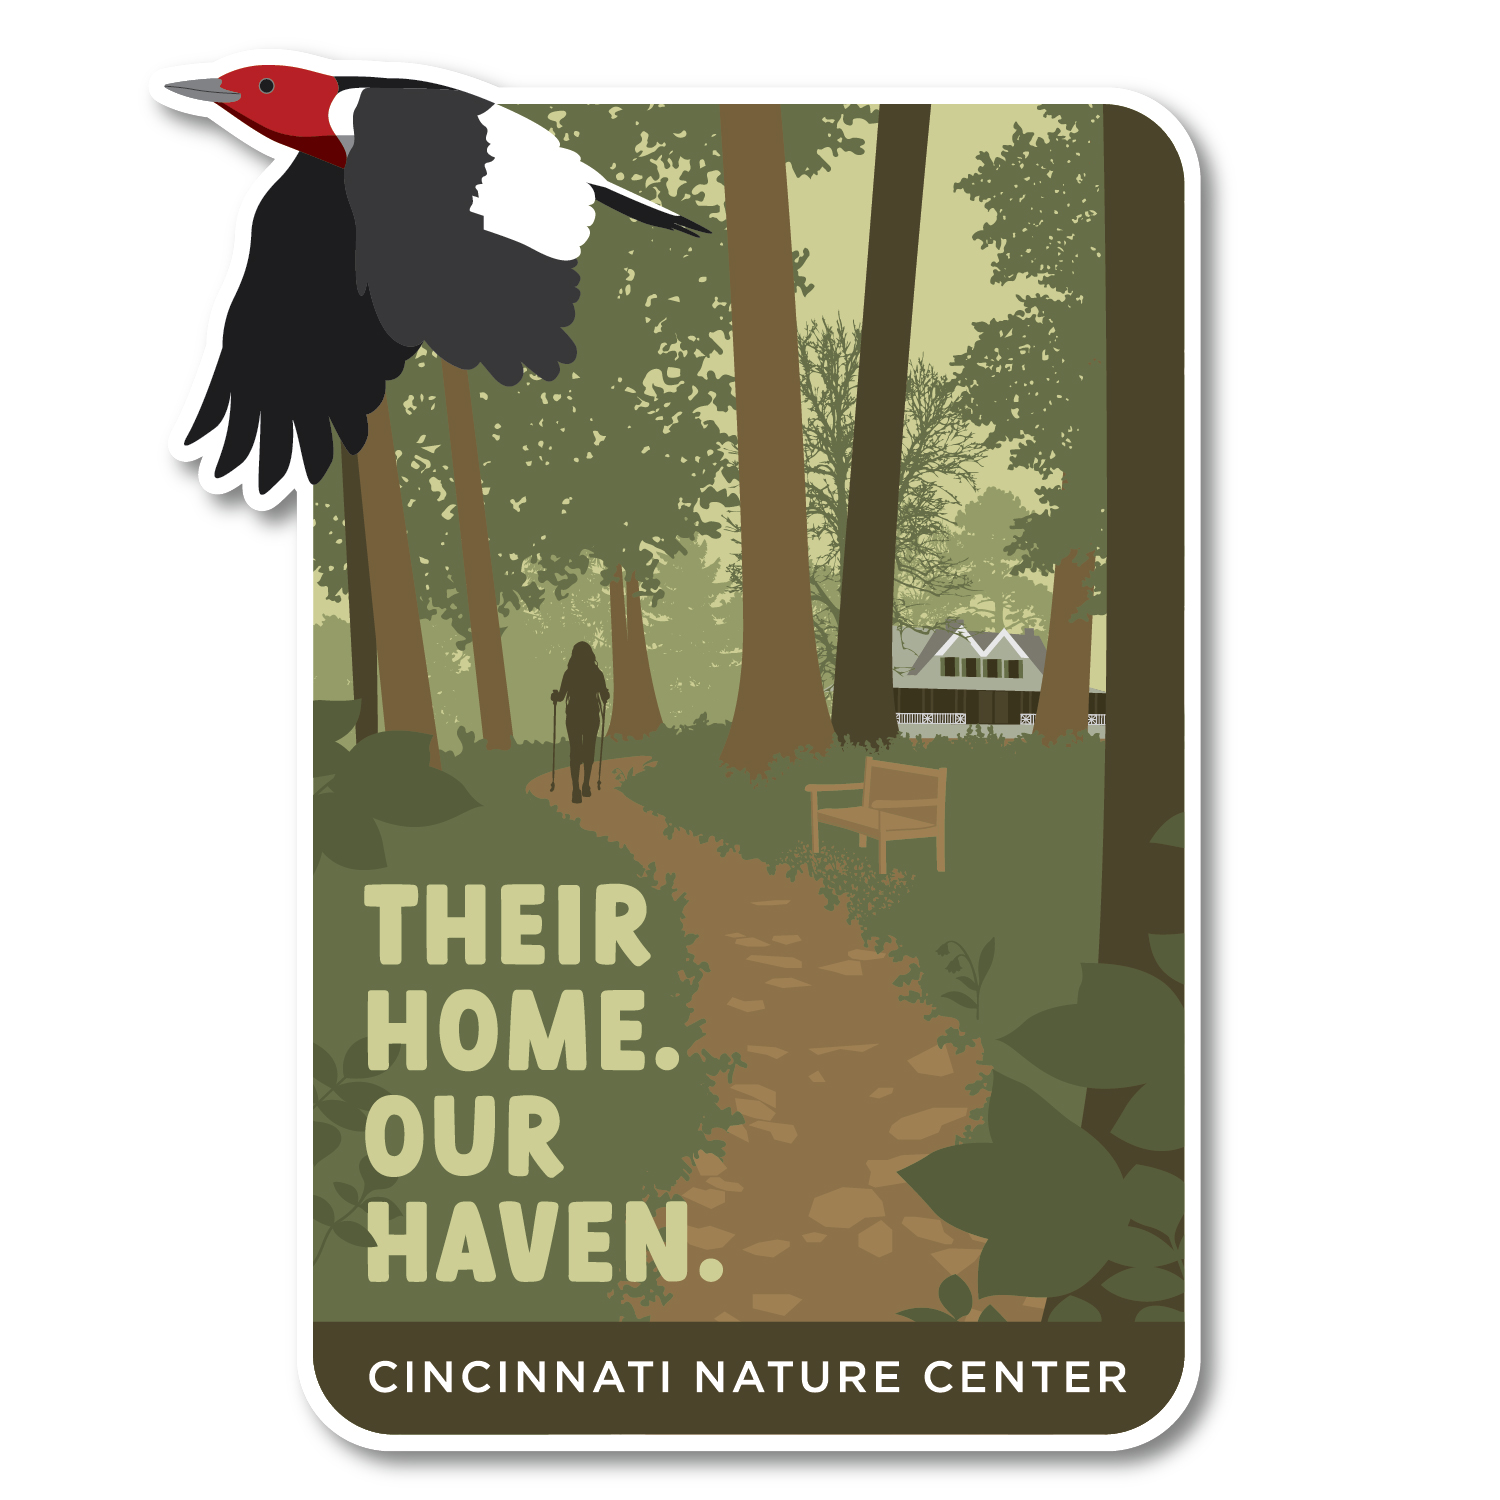 Their Home. Our Haven. Cincinnati Nature Center sticker design includes a person's silhouette hiking Upland Trail with tall trees and Krippendorf Lodge in the background and a red-headed woodpecker in the foreground